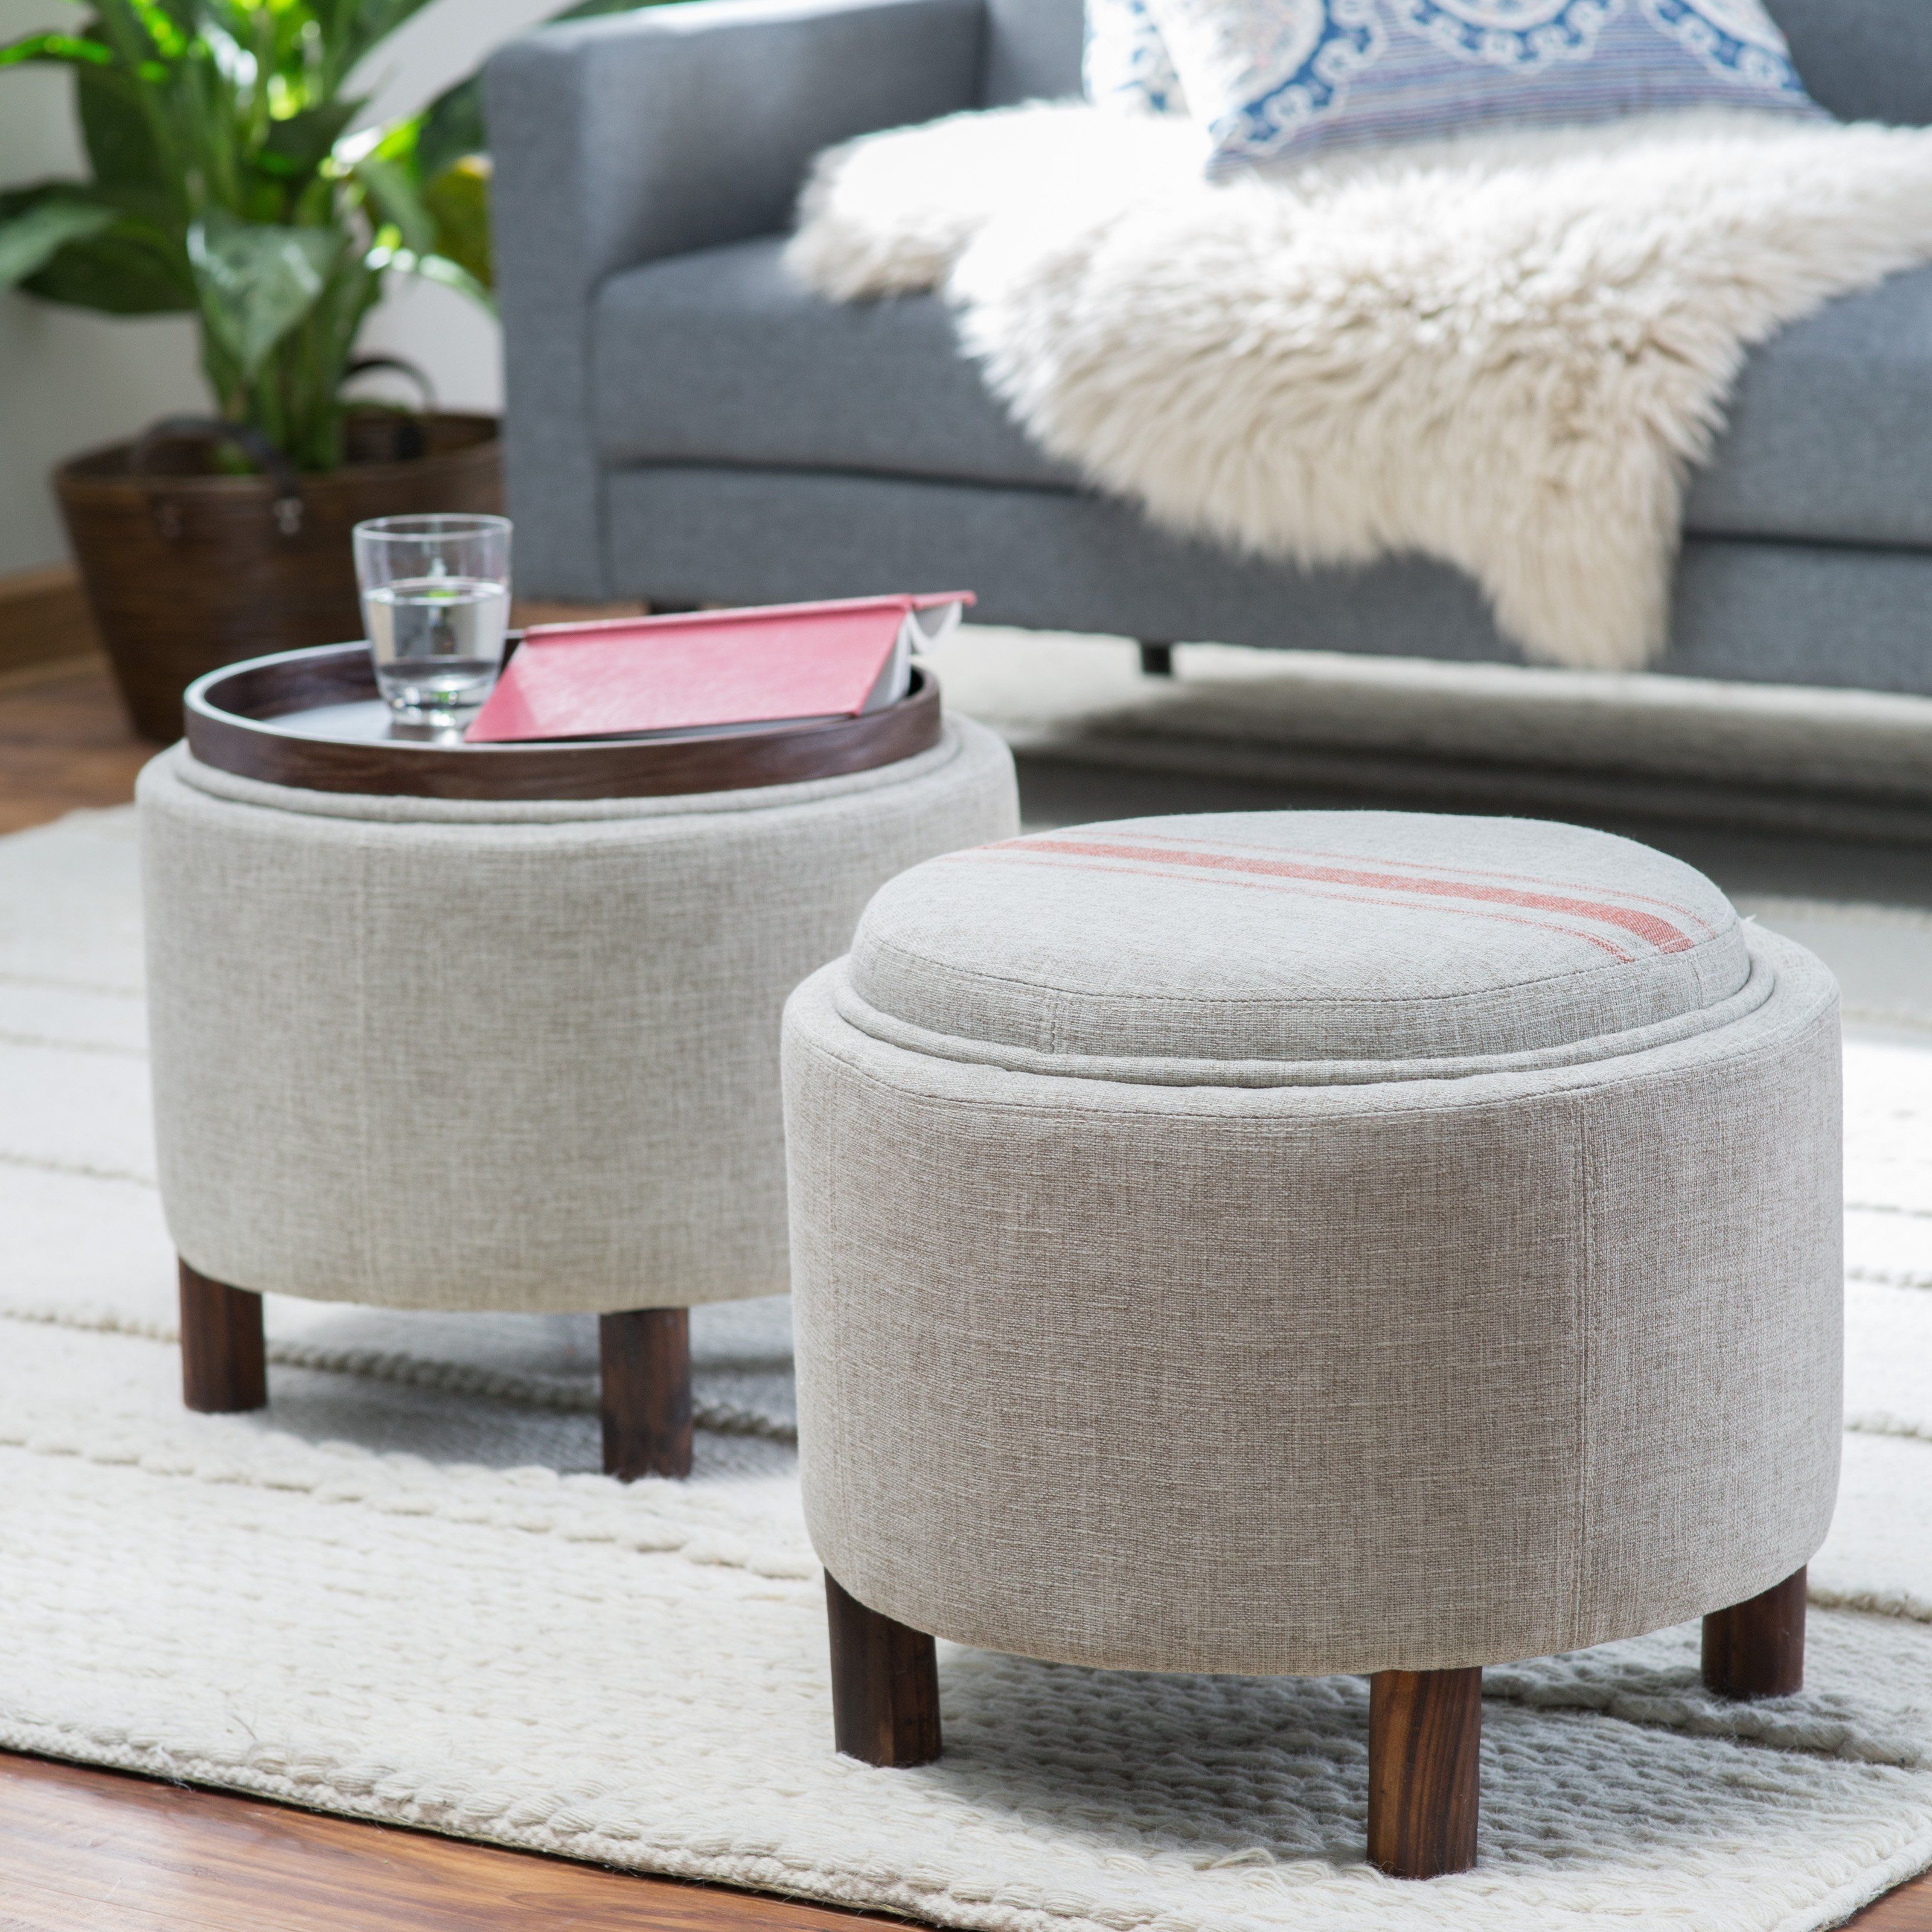 Belham Living Ingram Round Storage Ottoman With Cocktail Tray – Tb Intended For Ottomans With Tray (Photo 1 of 10)